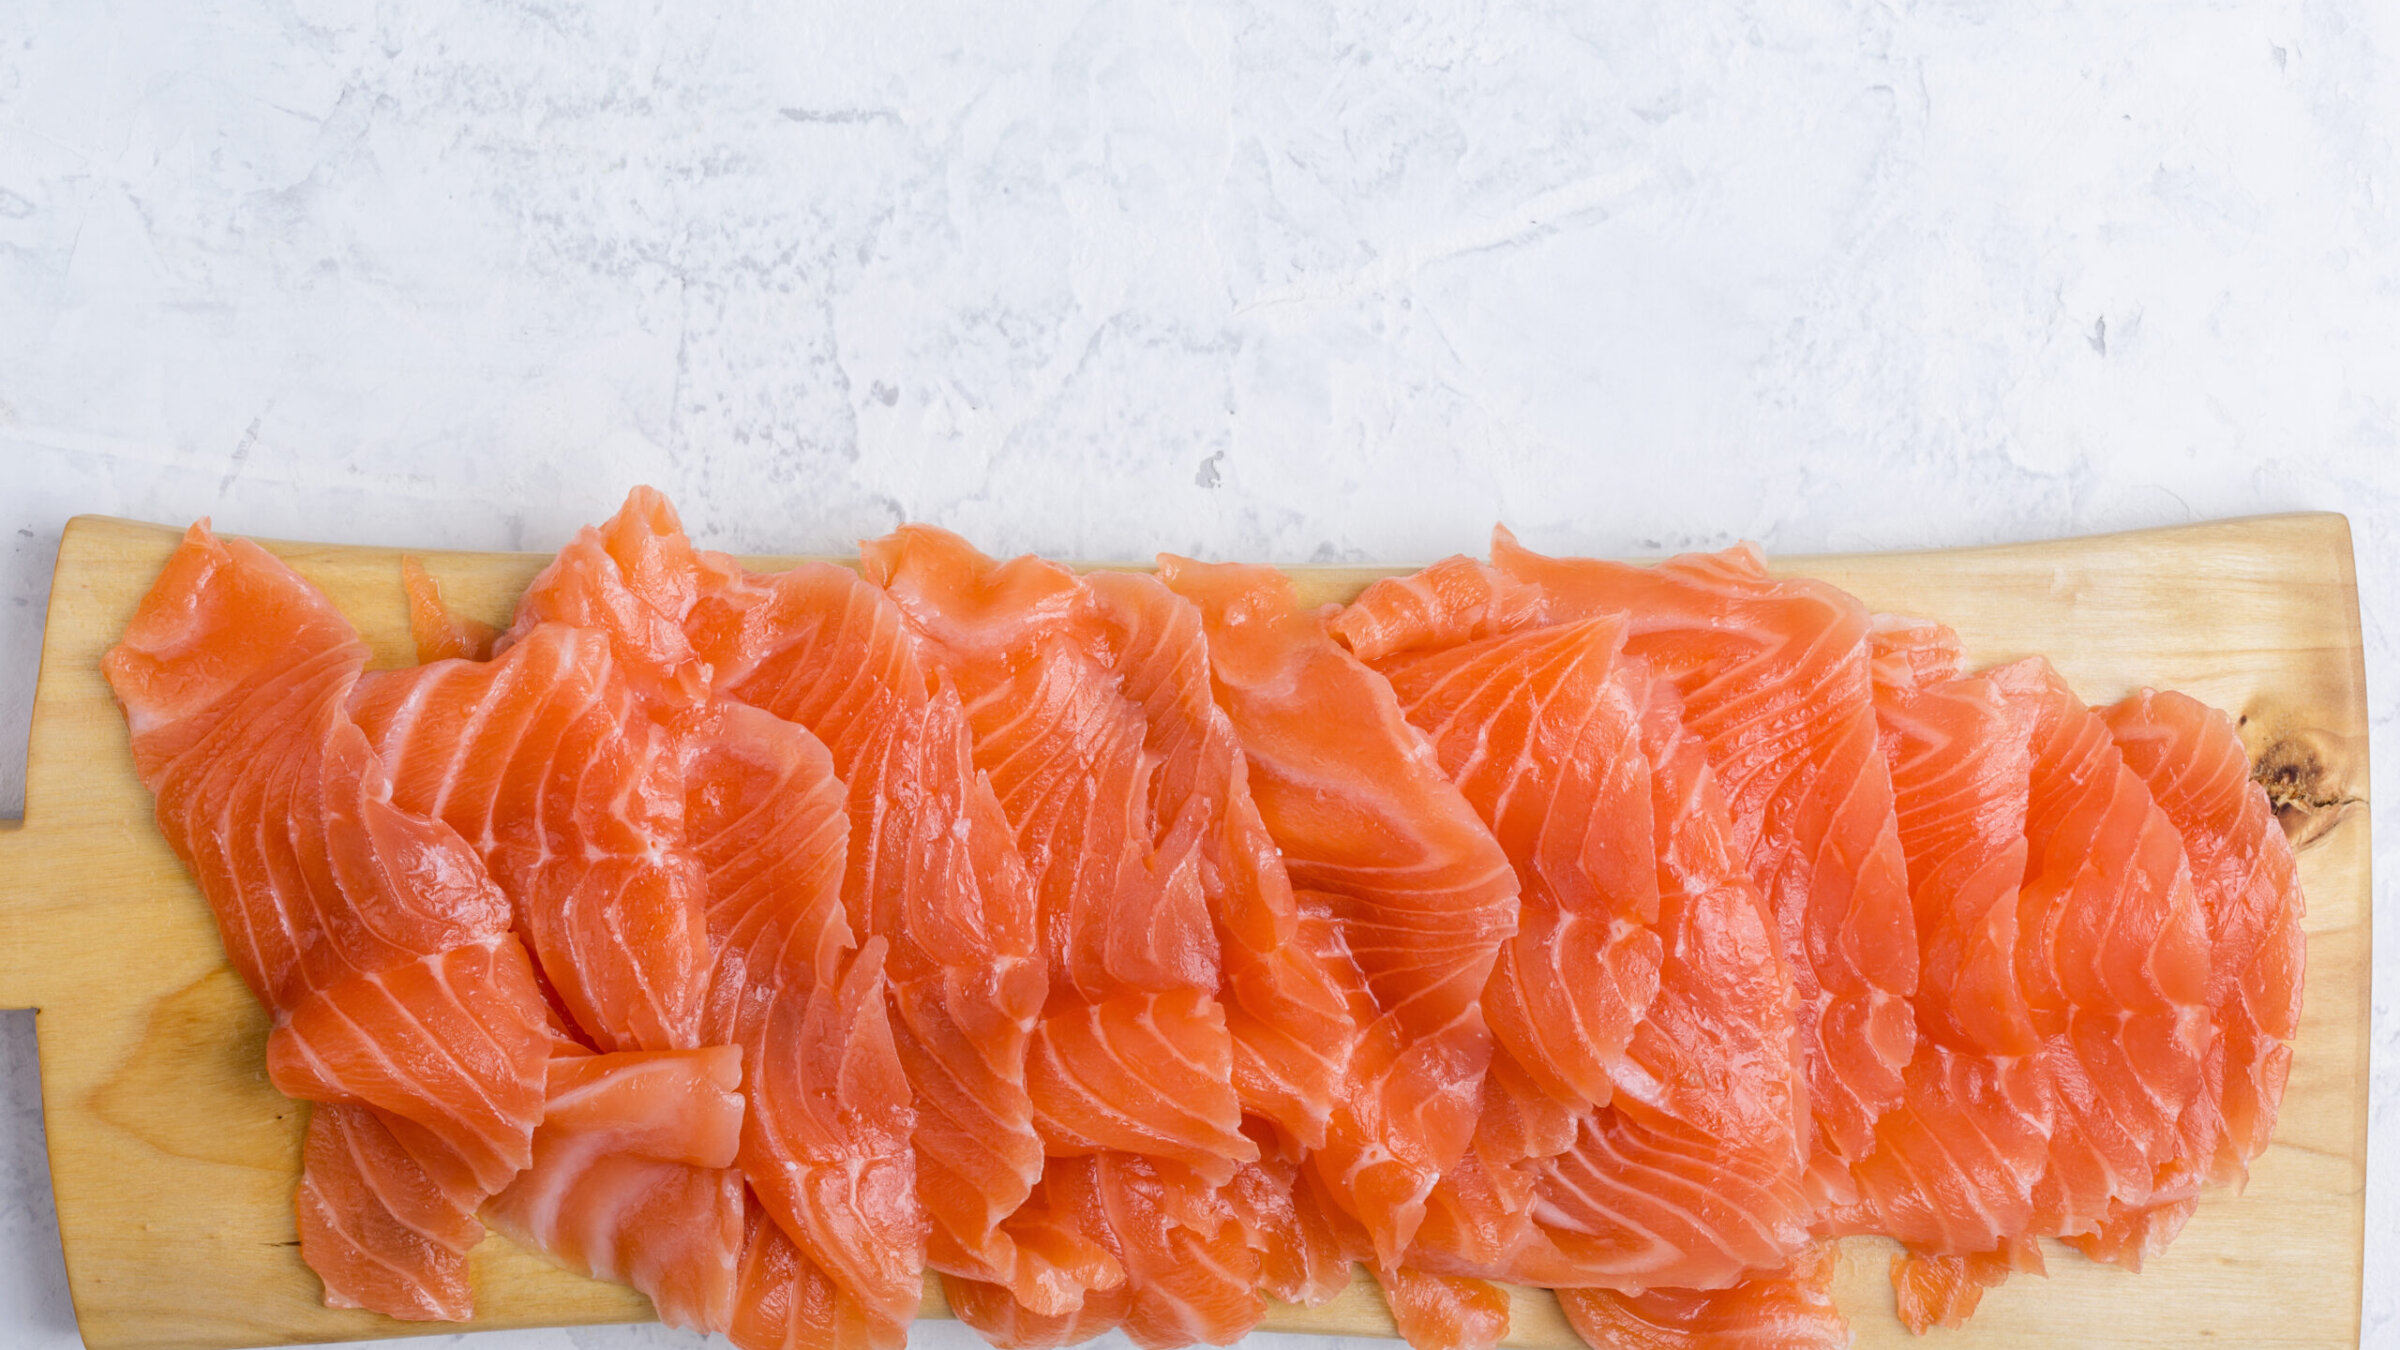 B’nai Jeshurun, a synagogue on Manhattan’s Upper West Side, said it was eliminating cured salmon from its kiddush menu due to environmental concerns. (Getty/istetiana)